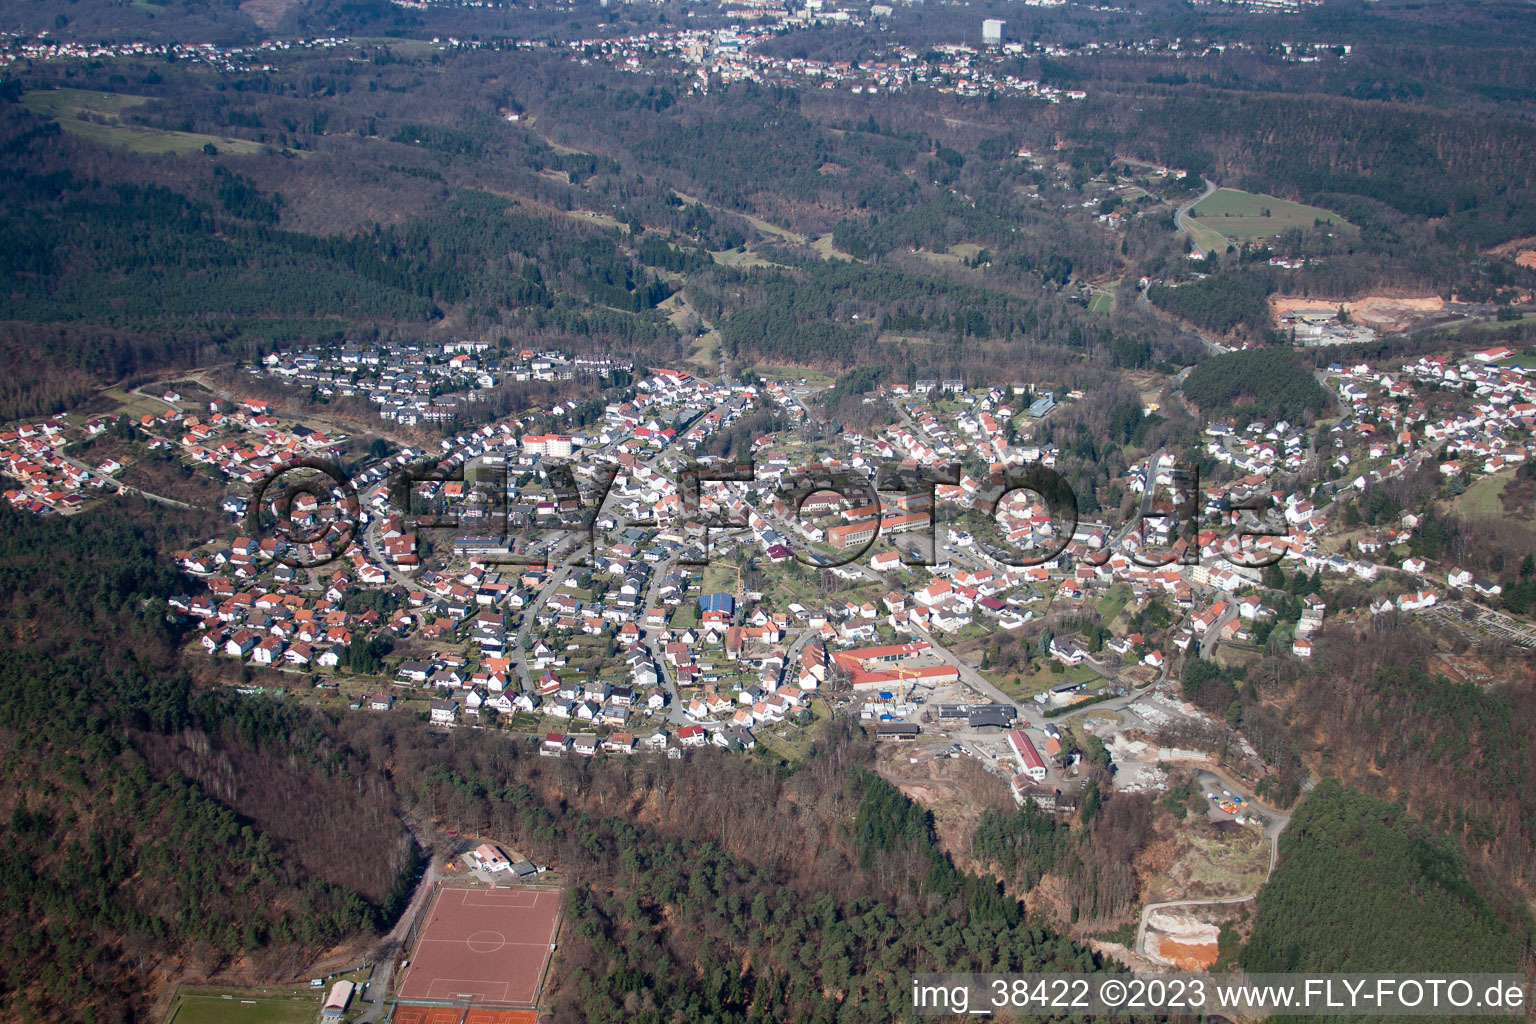 Drone image of Lemberg in the state Rhineland-Palatinate, Germany